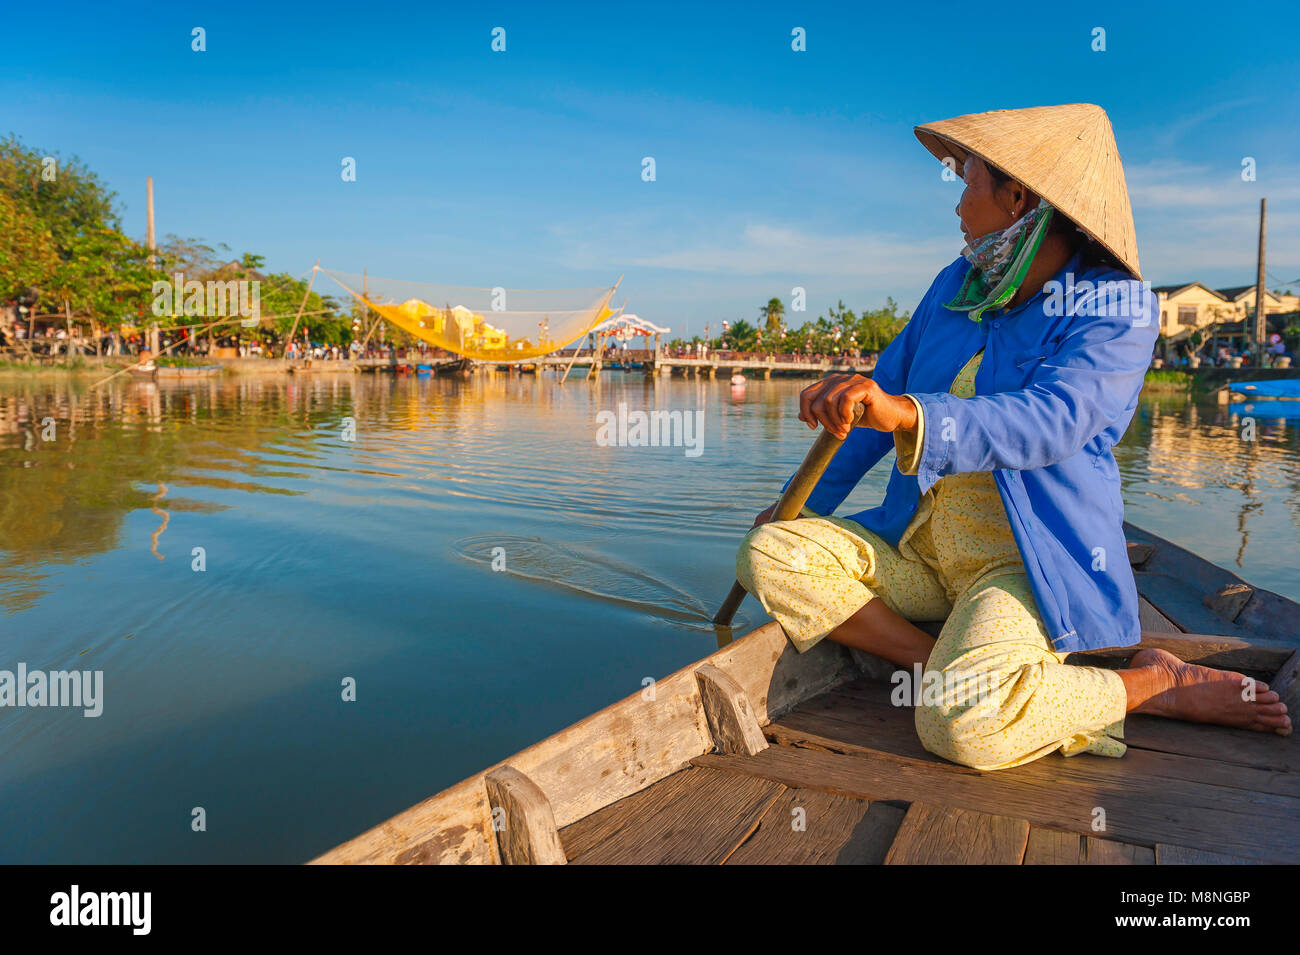 Hoi An river, view of a Vietnamese 'boat-lady' in a conical hat rowing along the Thu Bon River and looking towards the town of Hoi An, Vietnam. Stock Photo